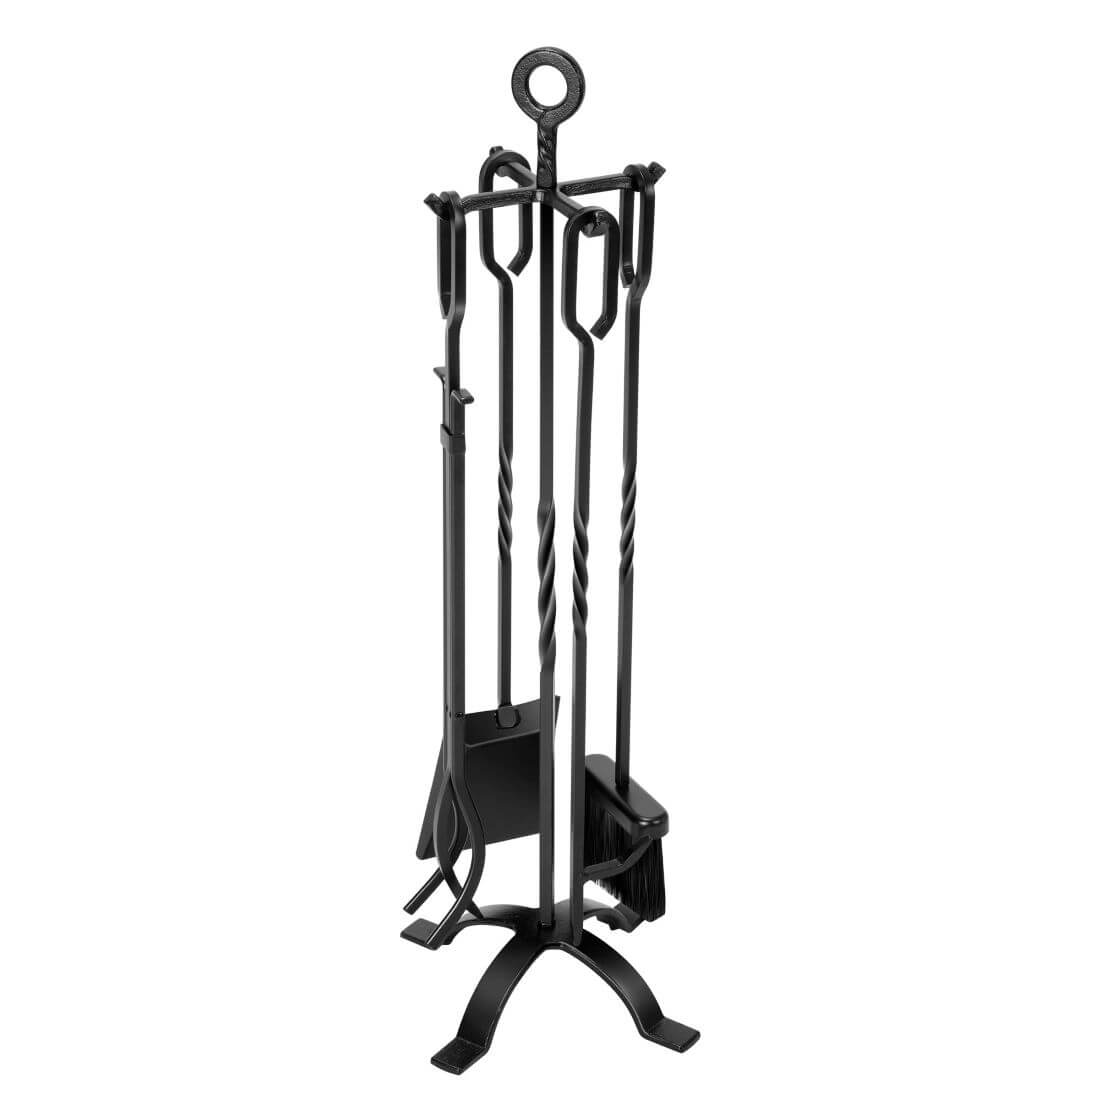 VIVOHOME 5 Pieces Wrought Iron Fireplace Tool Set with Poker Grabber Broom Shovel Stand with Handles Wood Stove Firepit Accessories Tools Modern Black